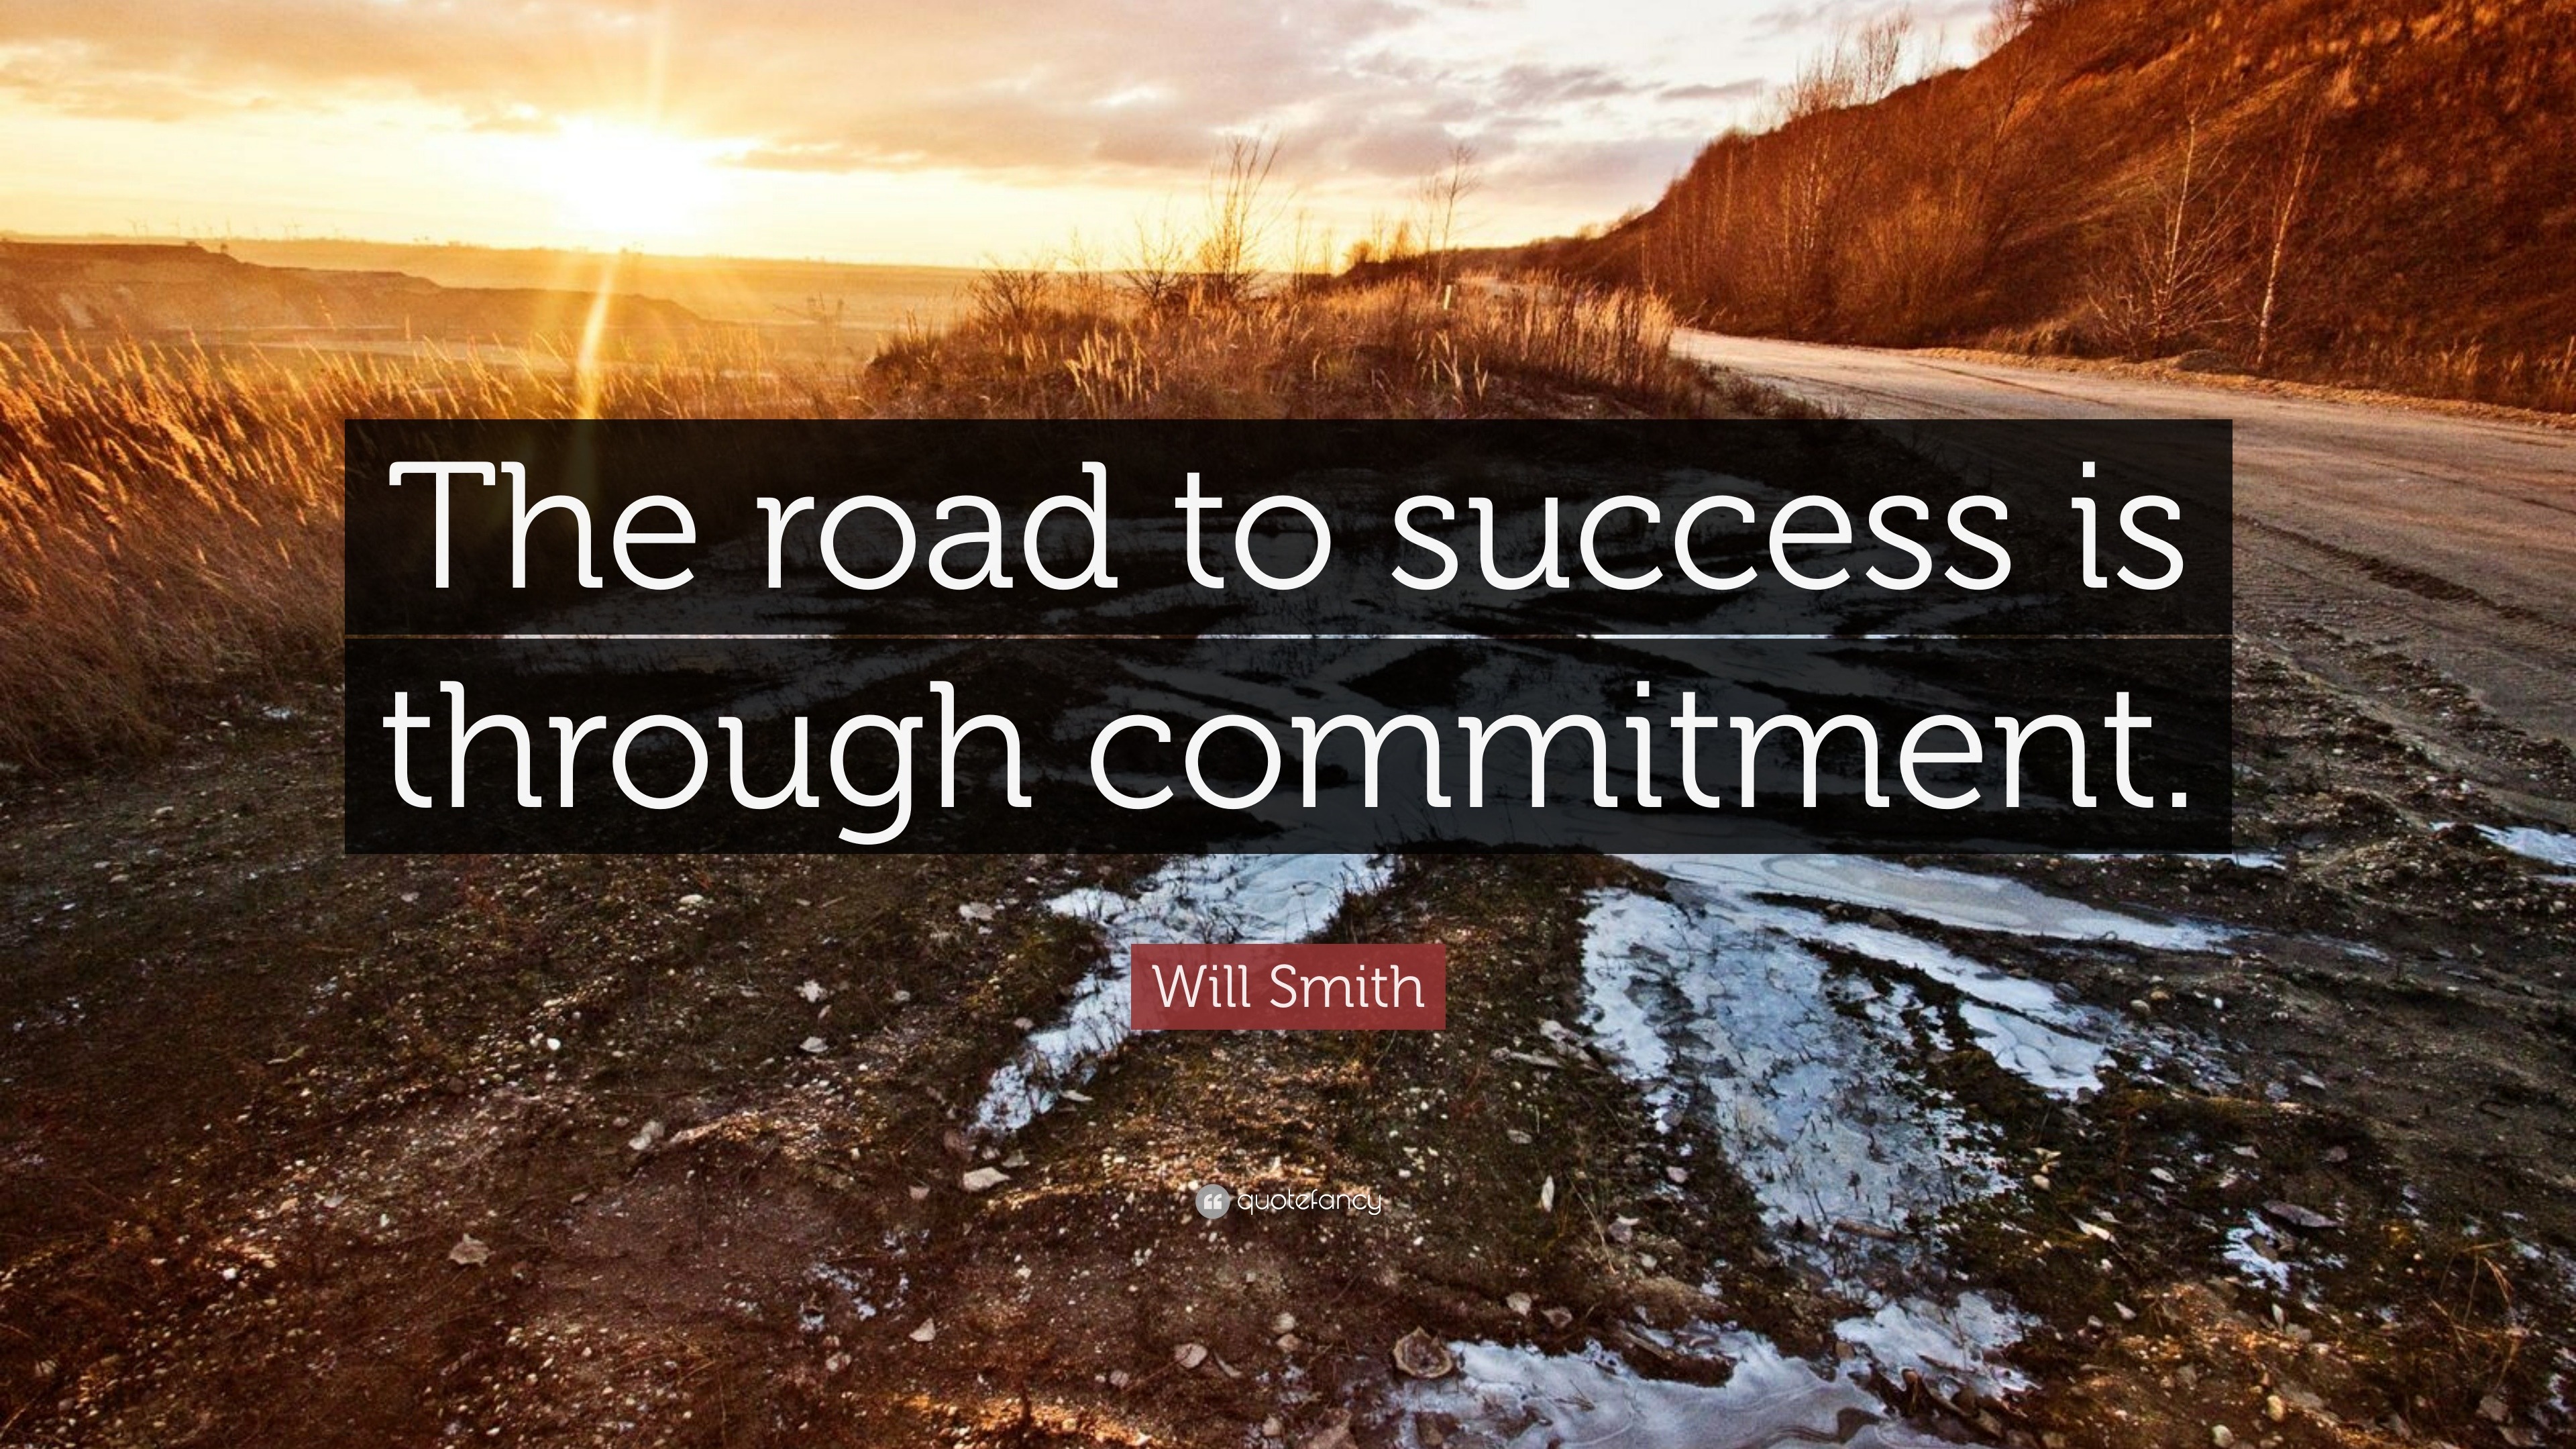 Commitment Quotes Quote | Wallpaper Image Photo